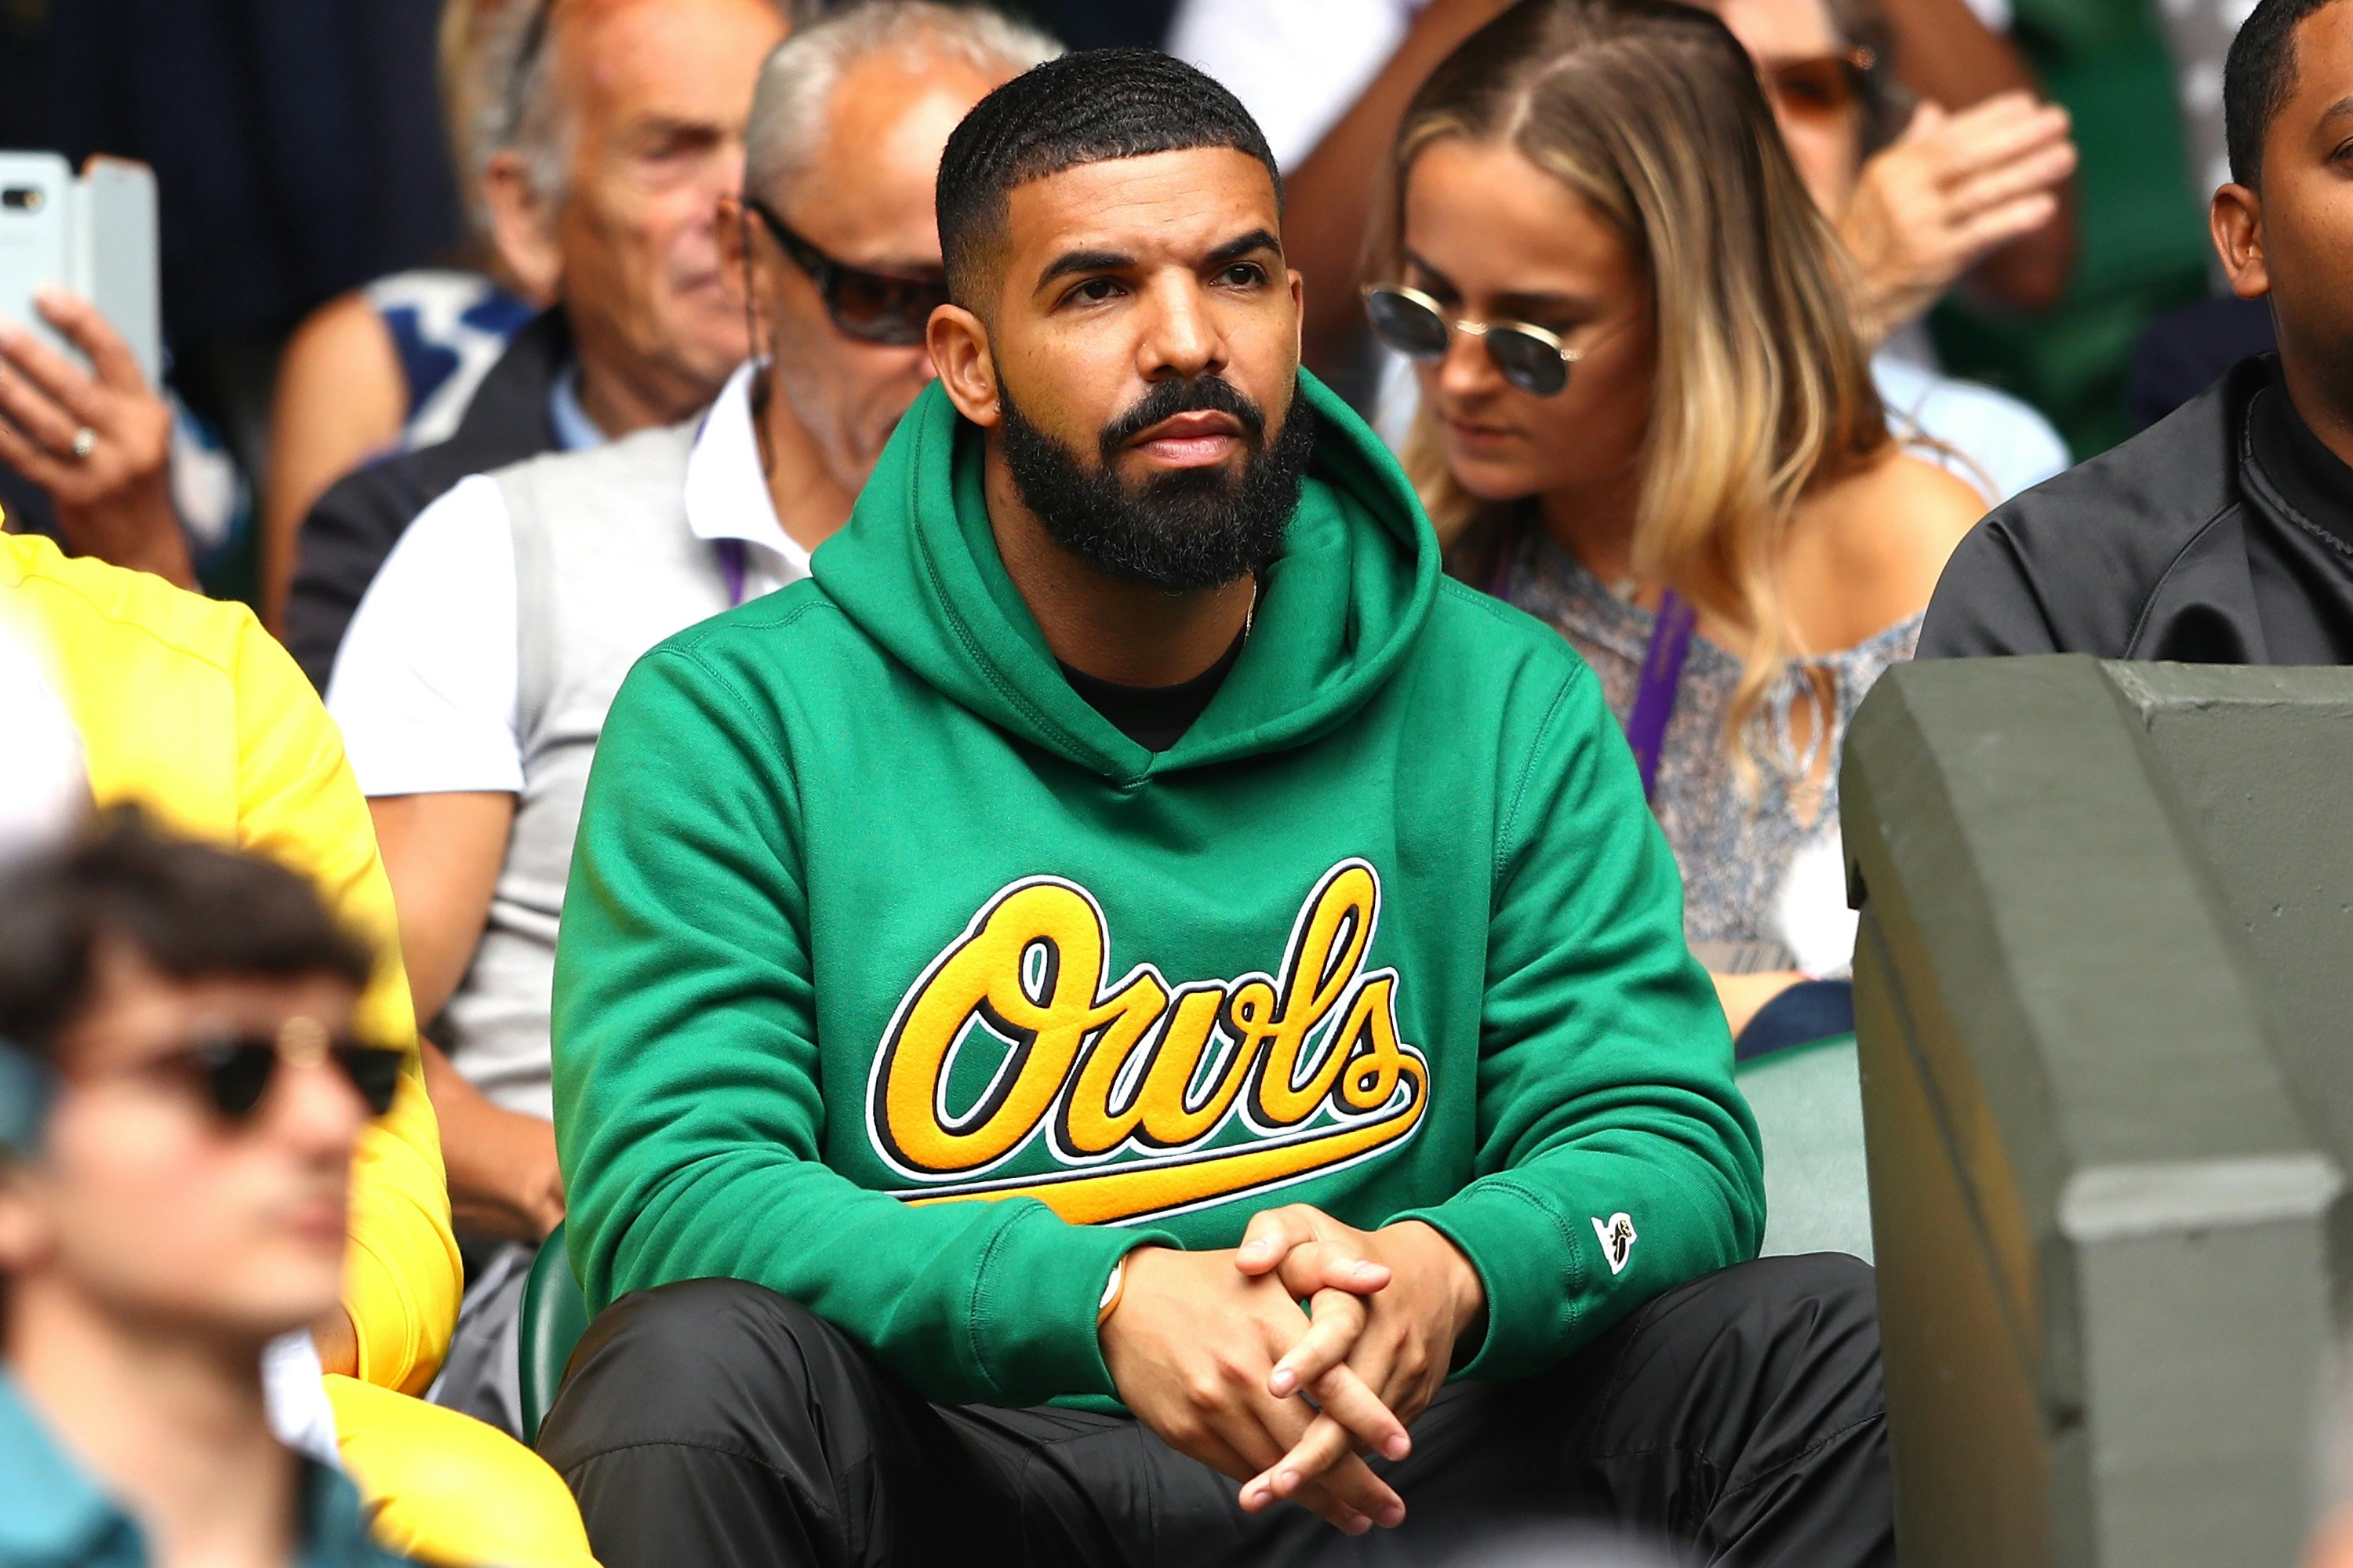 Drakes New Nonstop Video Is Already The Internets Favorite New